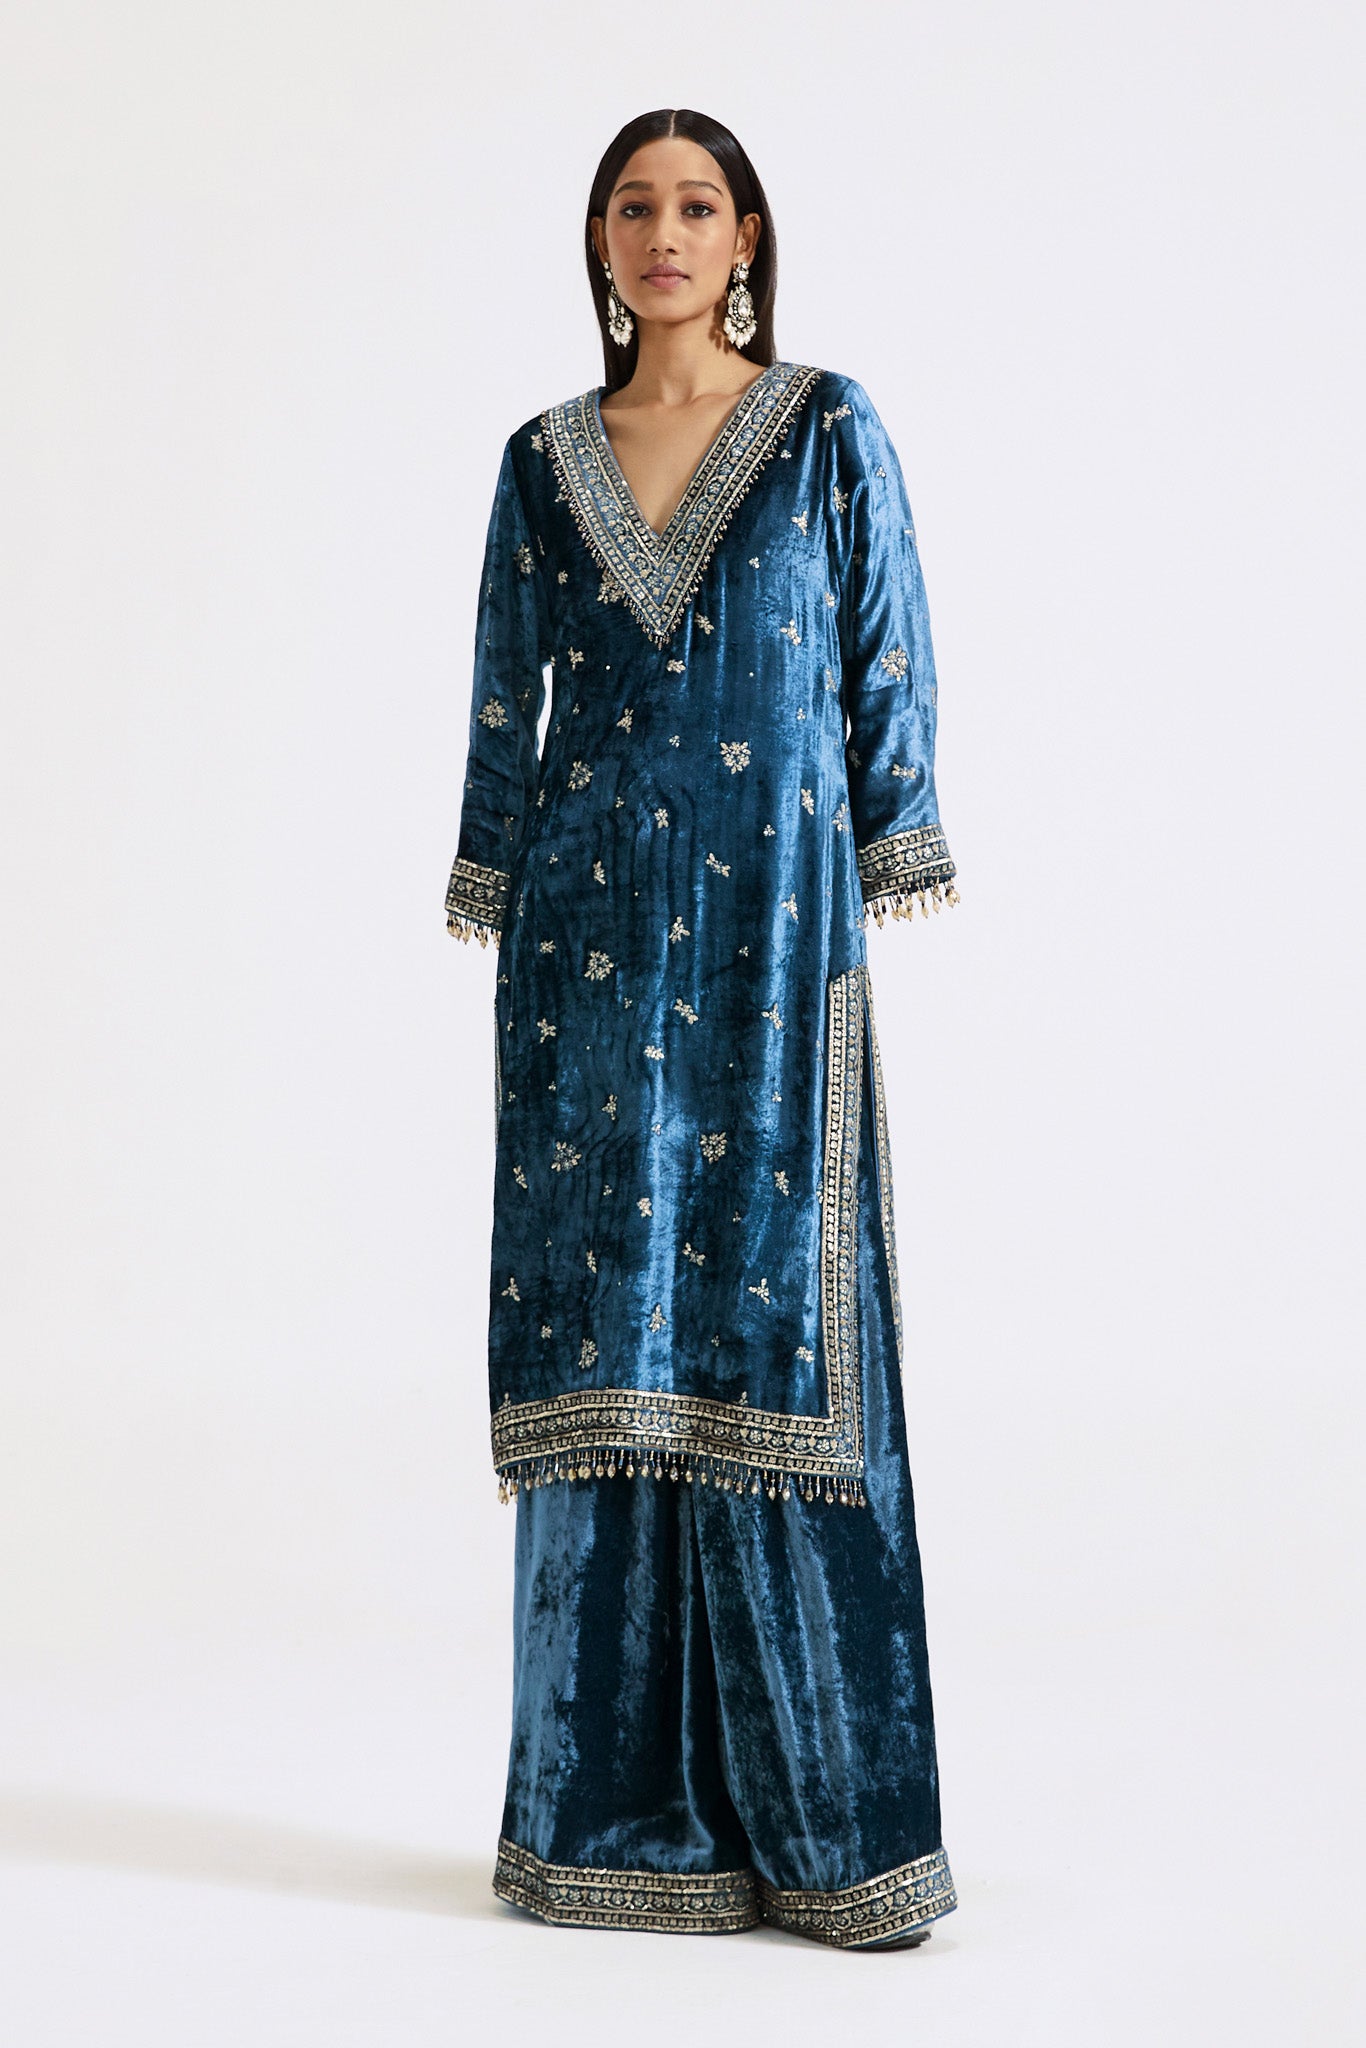 Buy blue velvet embroidered sharara suit online in USA with dupatta. Shop the best and latest designs in embroidered sarees, designer sarees, Anarkali suit, lehengas, sharara suits for weddings and special occasions from Pure Elegance Indian fashion store in USA.-front